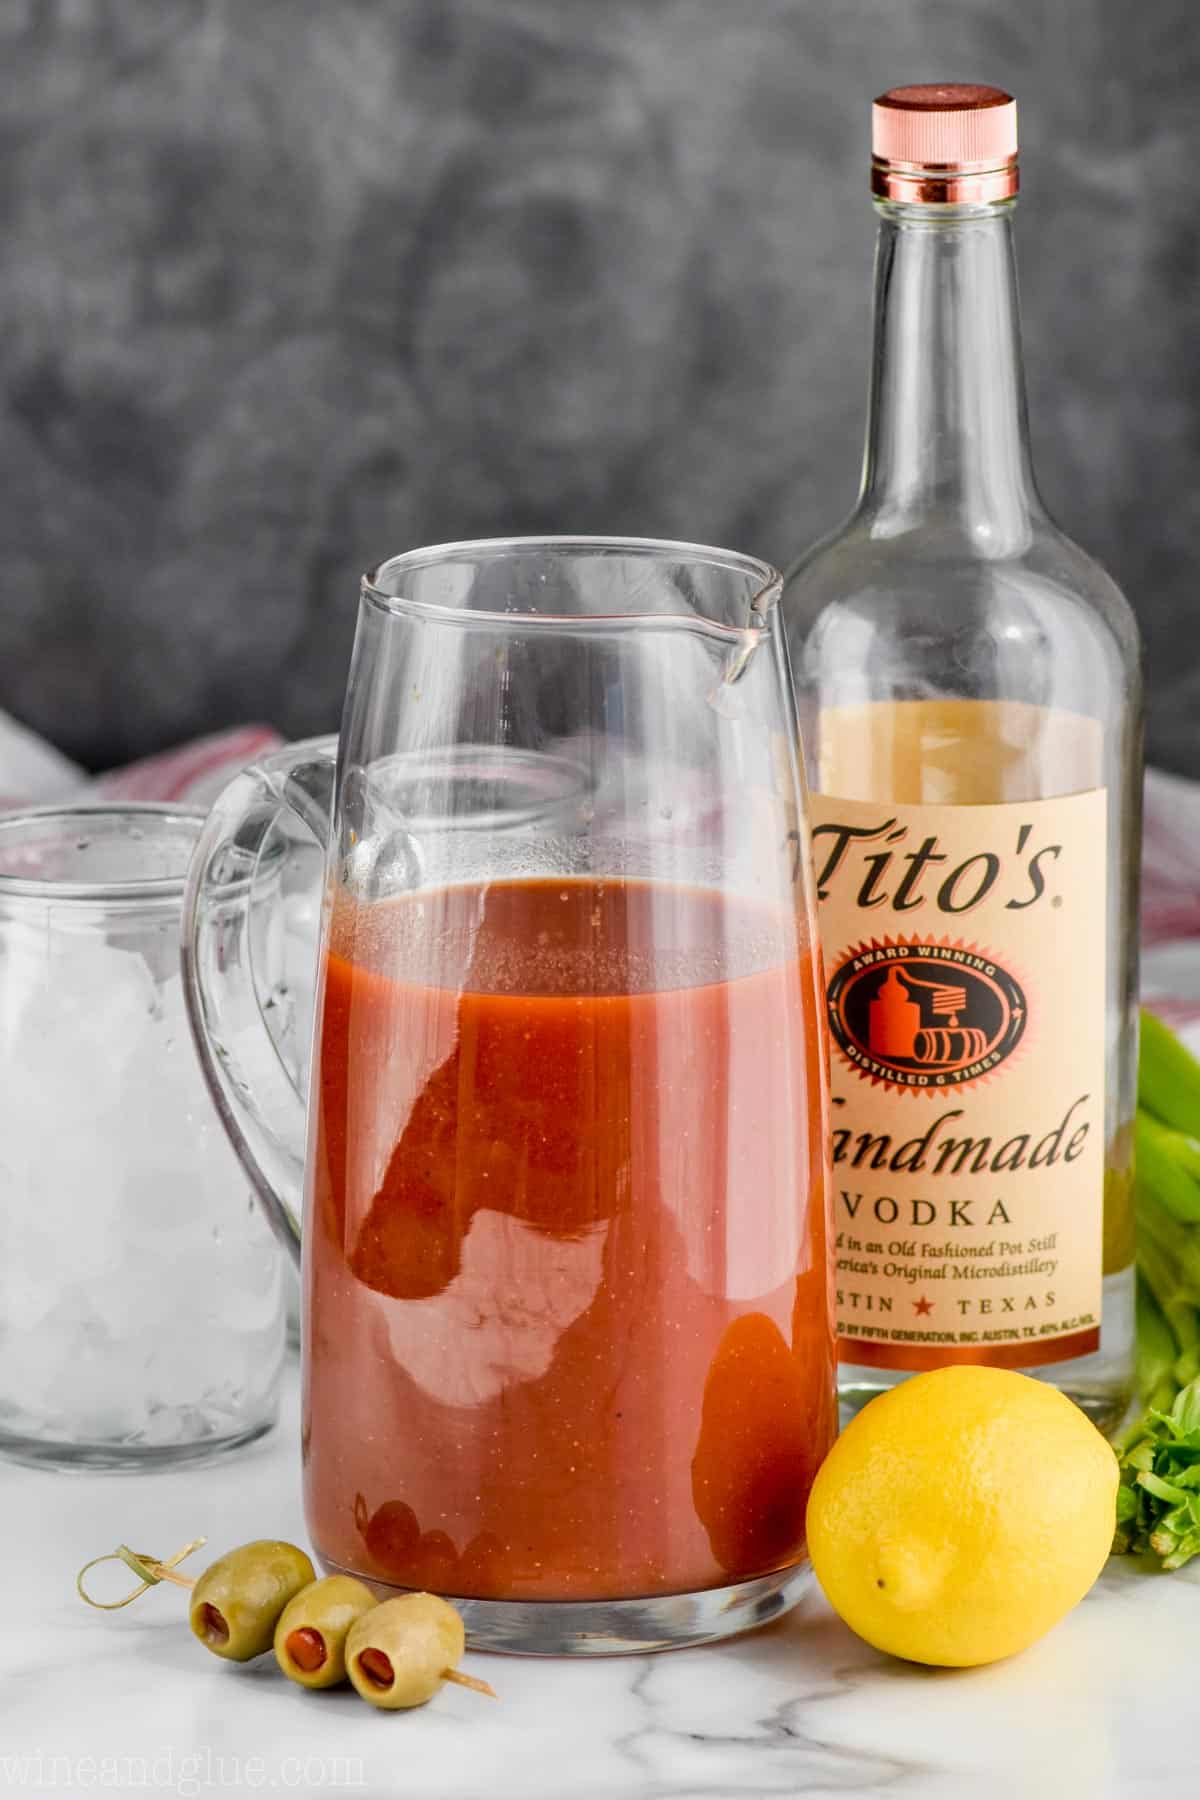 https://www.simplejoy.com/wp-content/uploads/2018/09/best_bloody_mary_mix_recipe_image.jpg